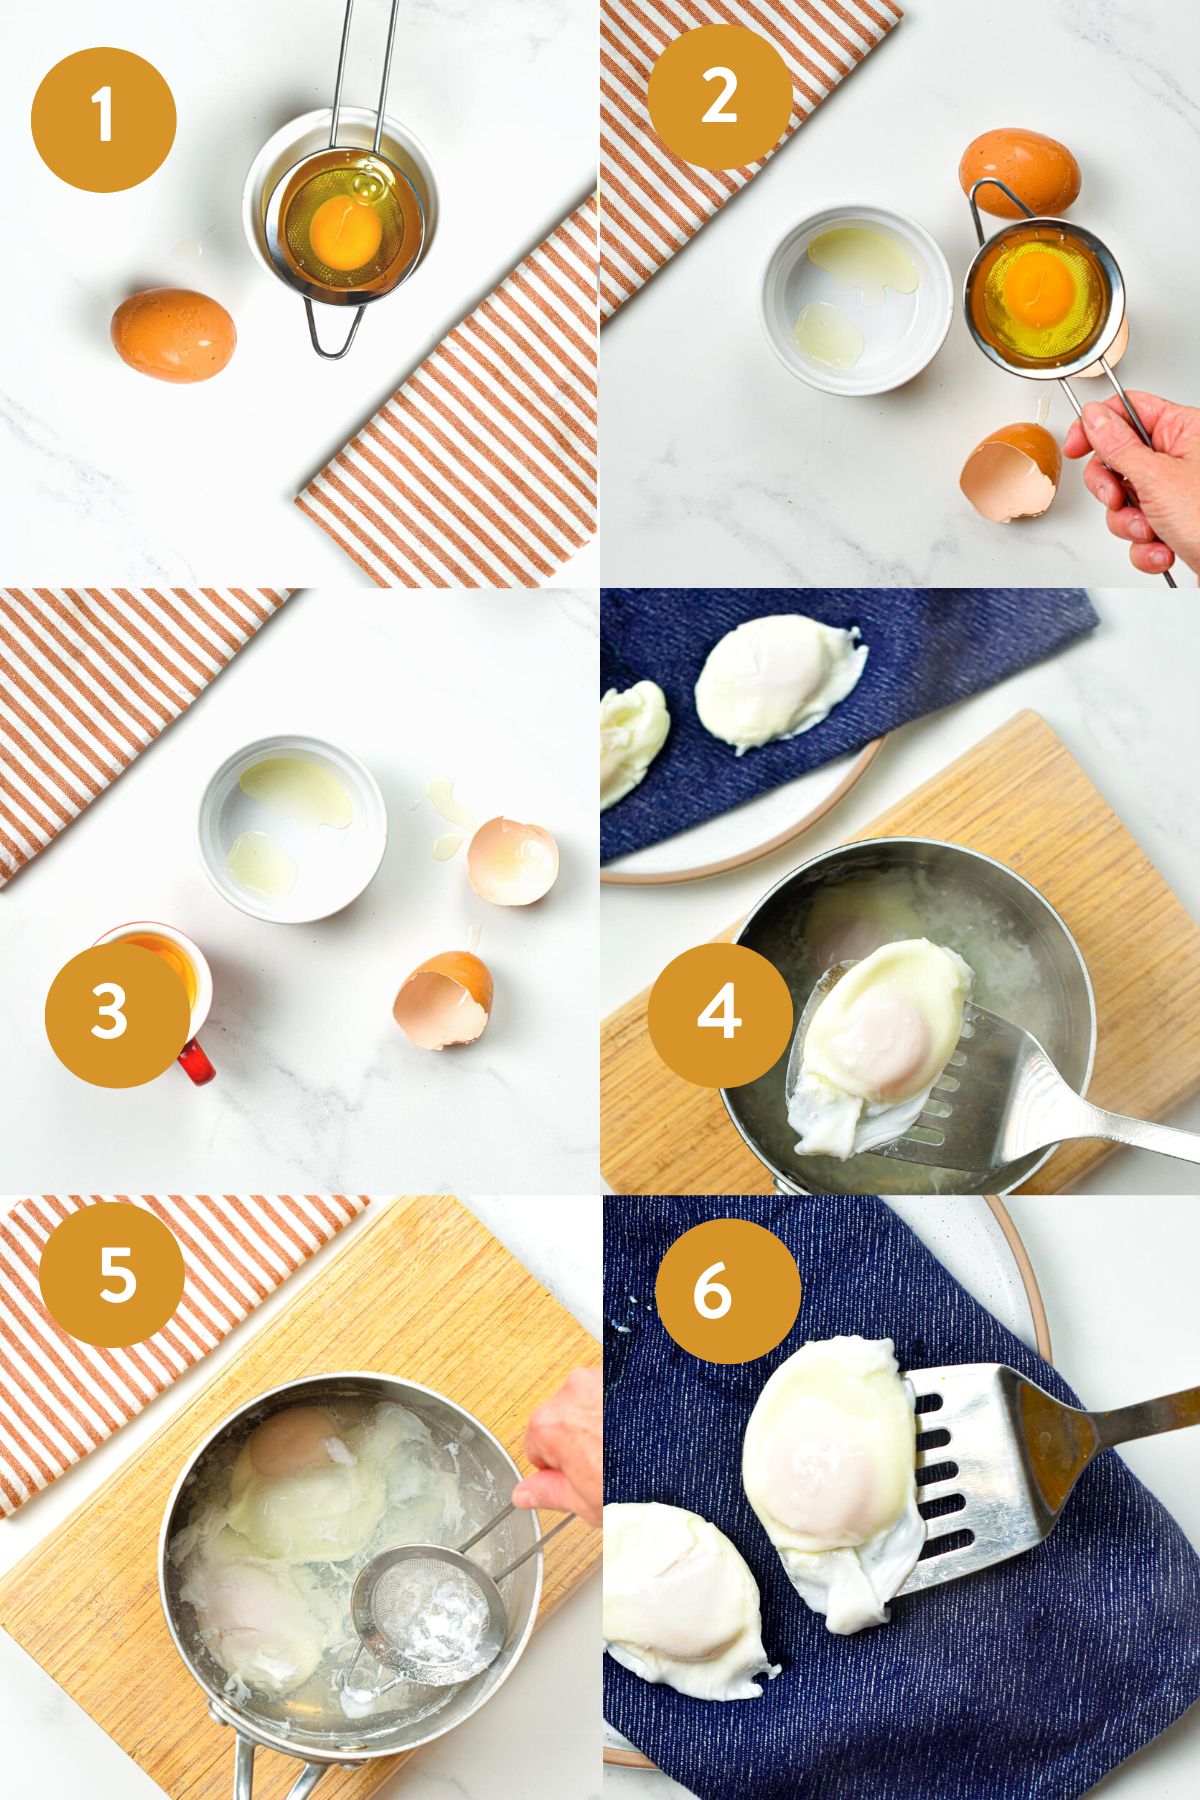 Step-by-step instructions to making delicious poached eggs.